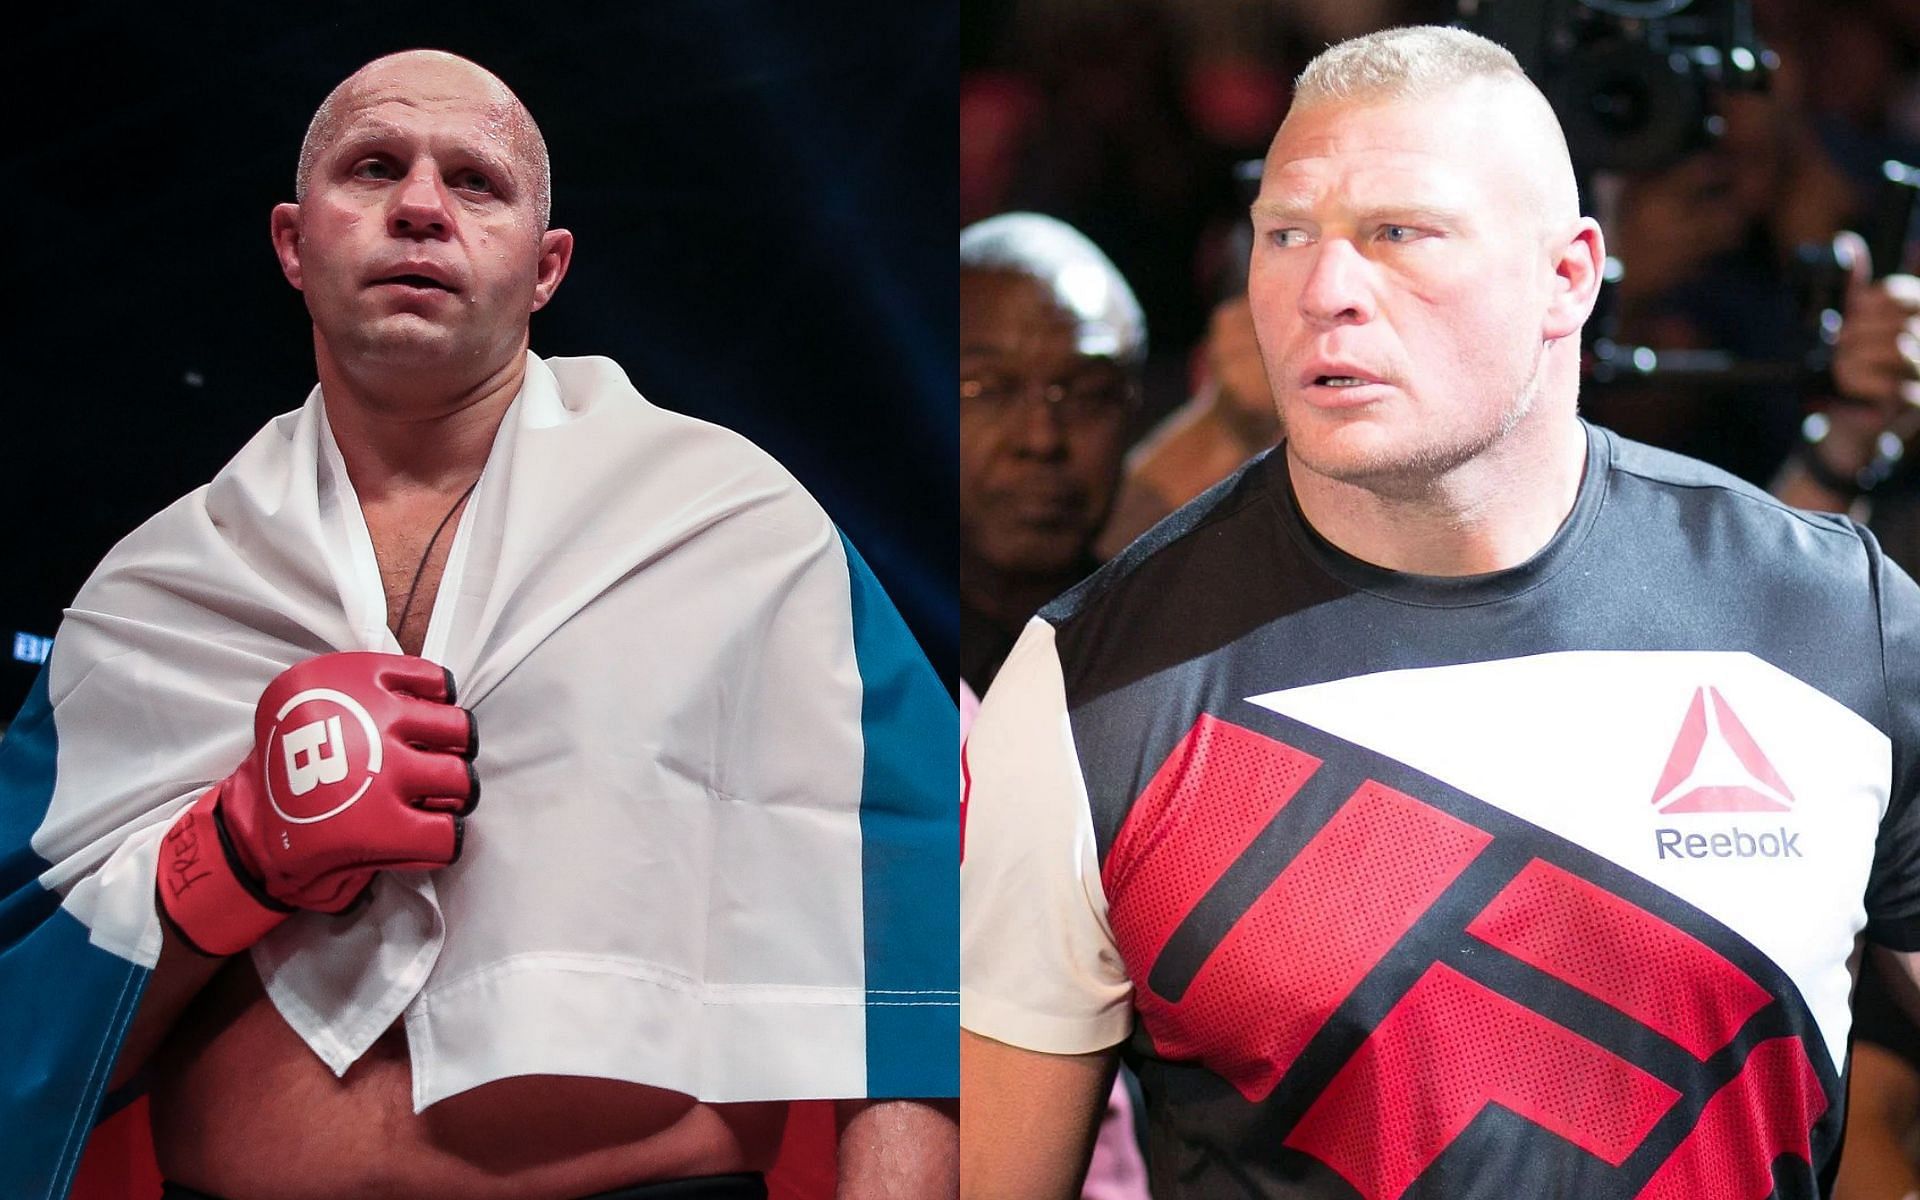 What if Brock Lesnar and Fedor Emelianenko had fought in their prime? [Image courtesy: Lucas Noonan/Bellator MMA, and Getty Images]